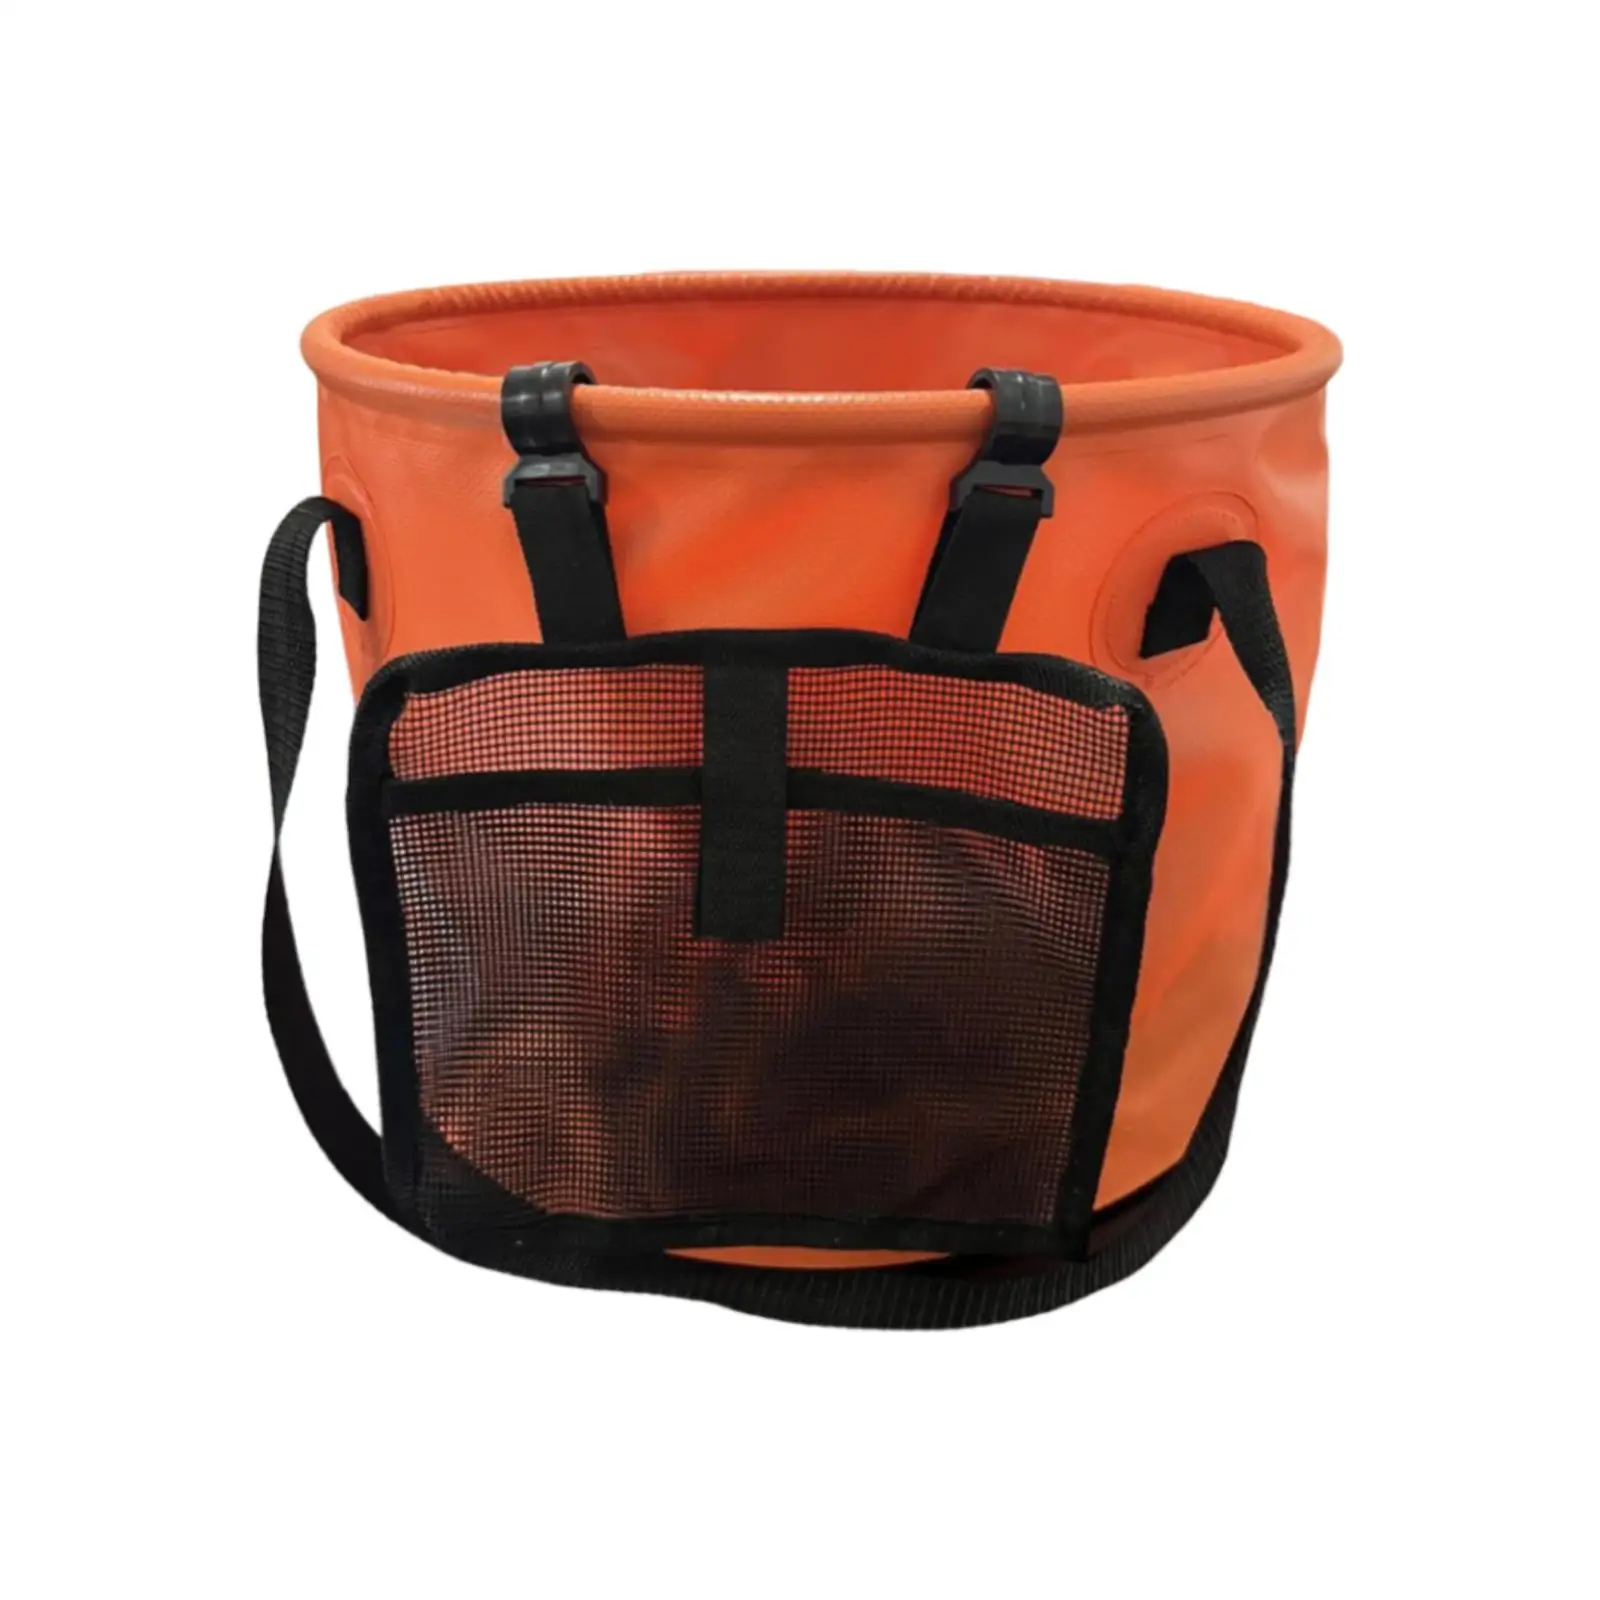 Collapsible Bucket Multifunctional Fishing Bucket 28L Folding Water Storage Bucket for Camping Outdoor Fishing Beach Travelling